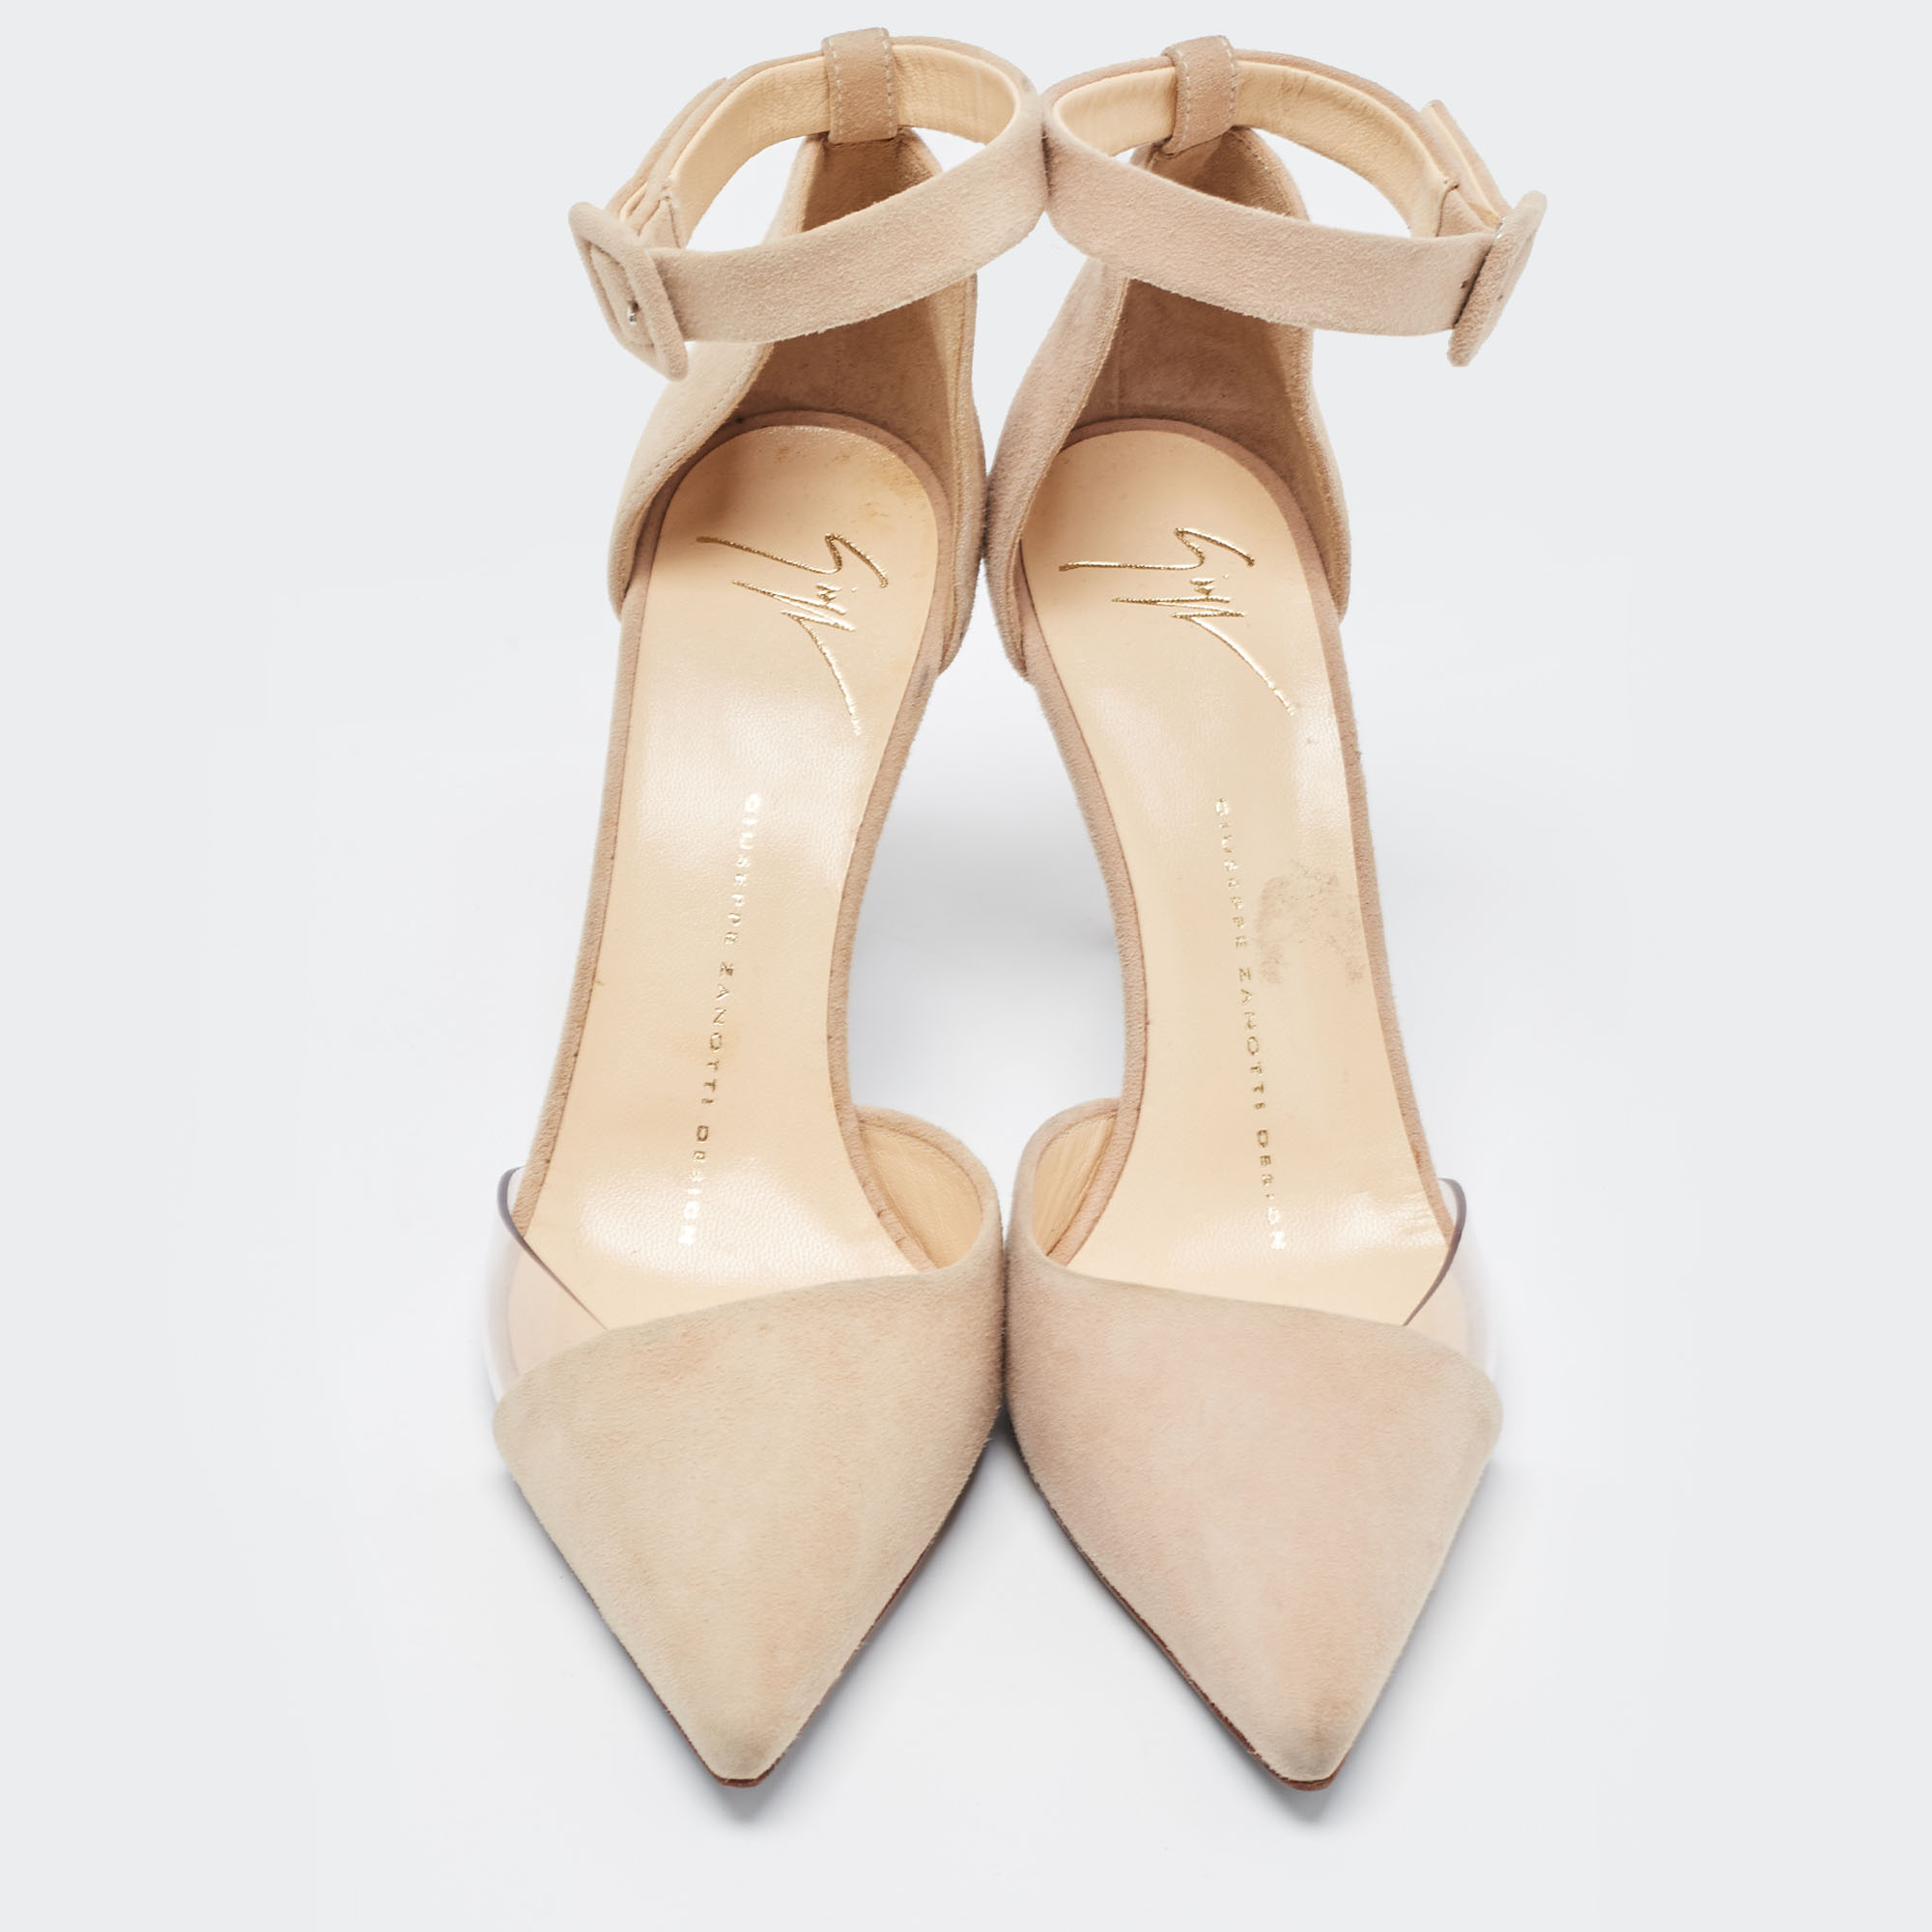 Giuseppe Zanotti Beige PVC And Suede Ankle Strap Pumps Size 36.5